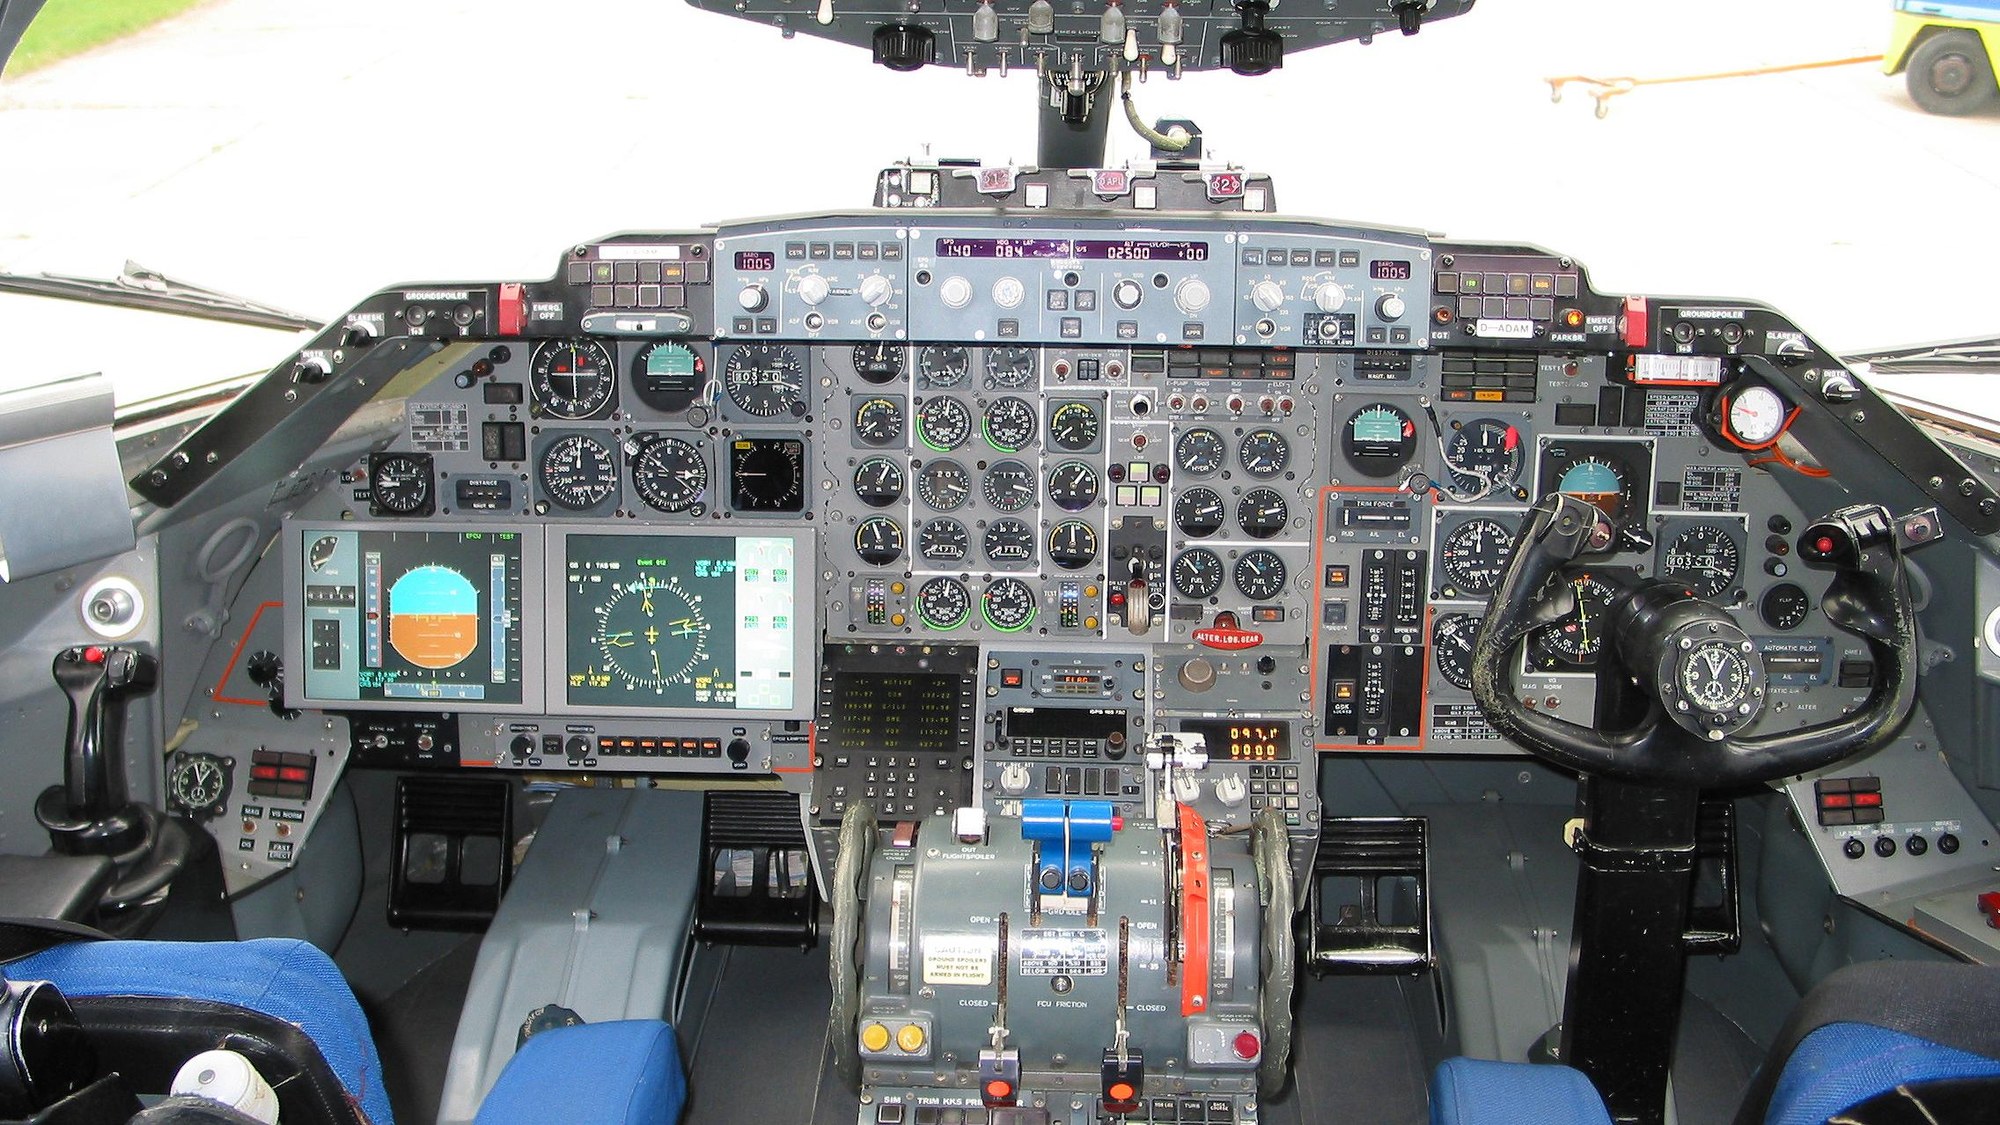 ATTAS cockpit after the upgrade in 2003